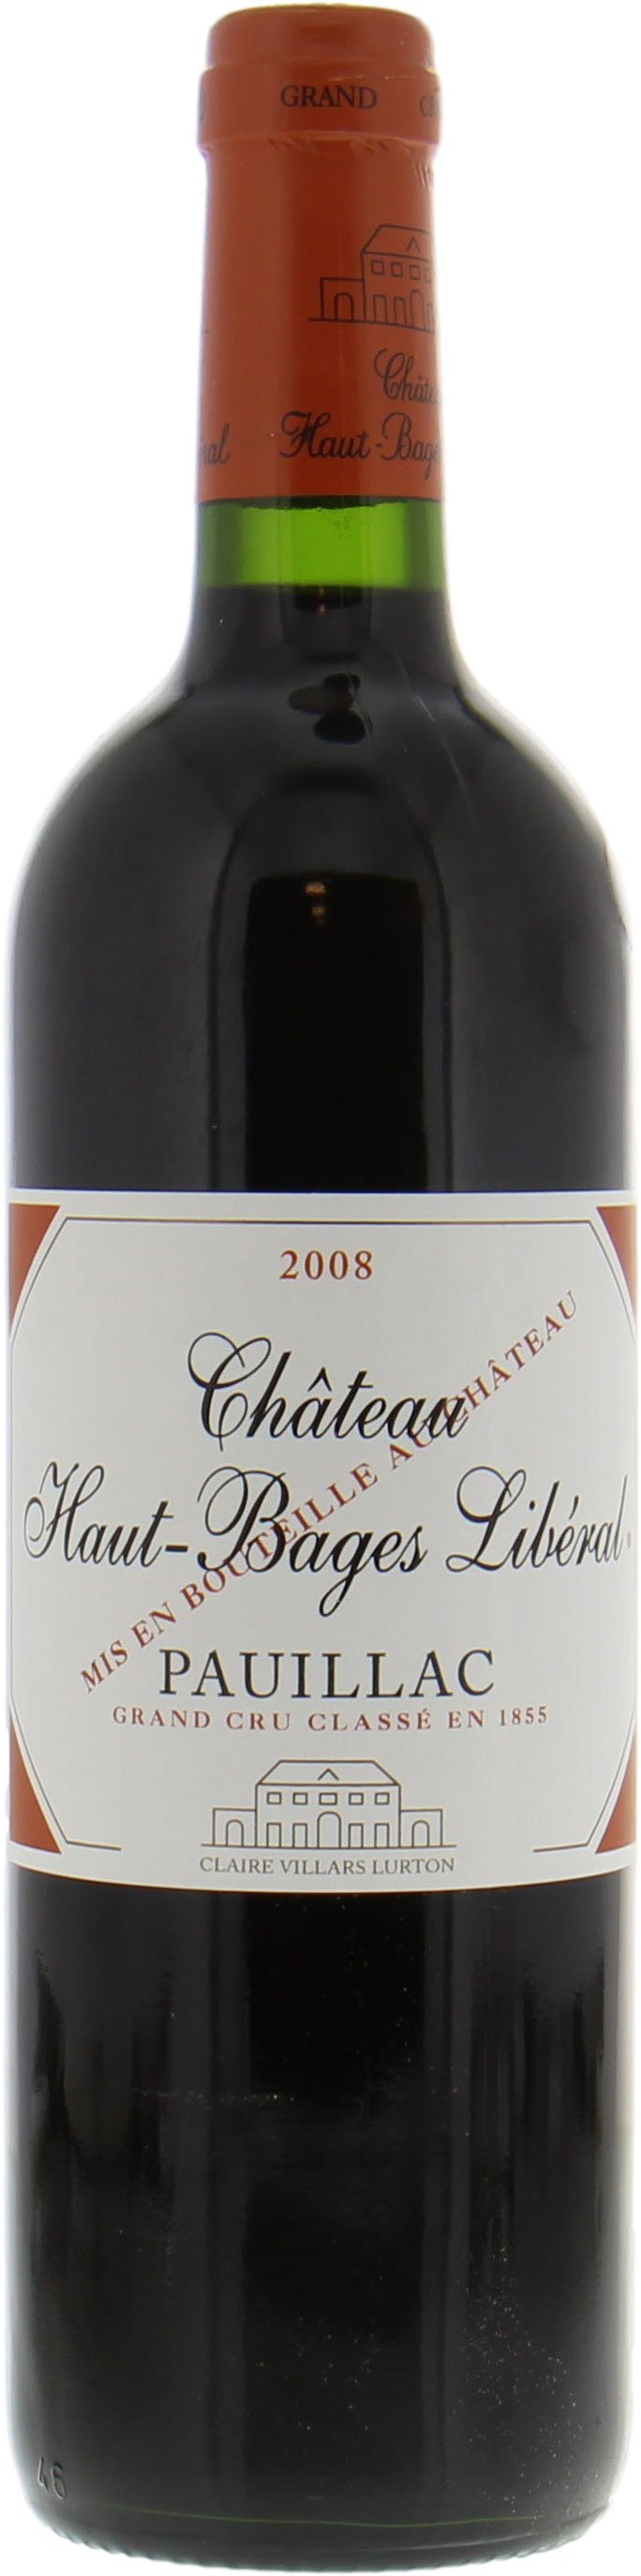 Chateau Haut Bages Liberal - Chateau Haut Bages Liberal 2008 Perfect